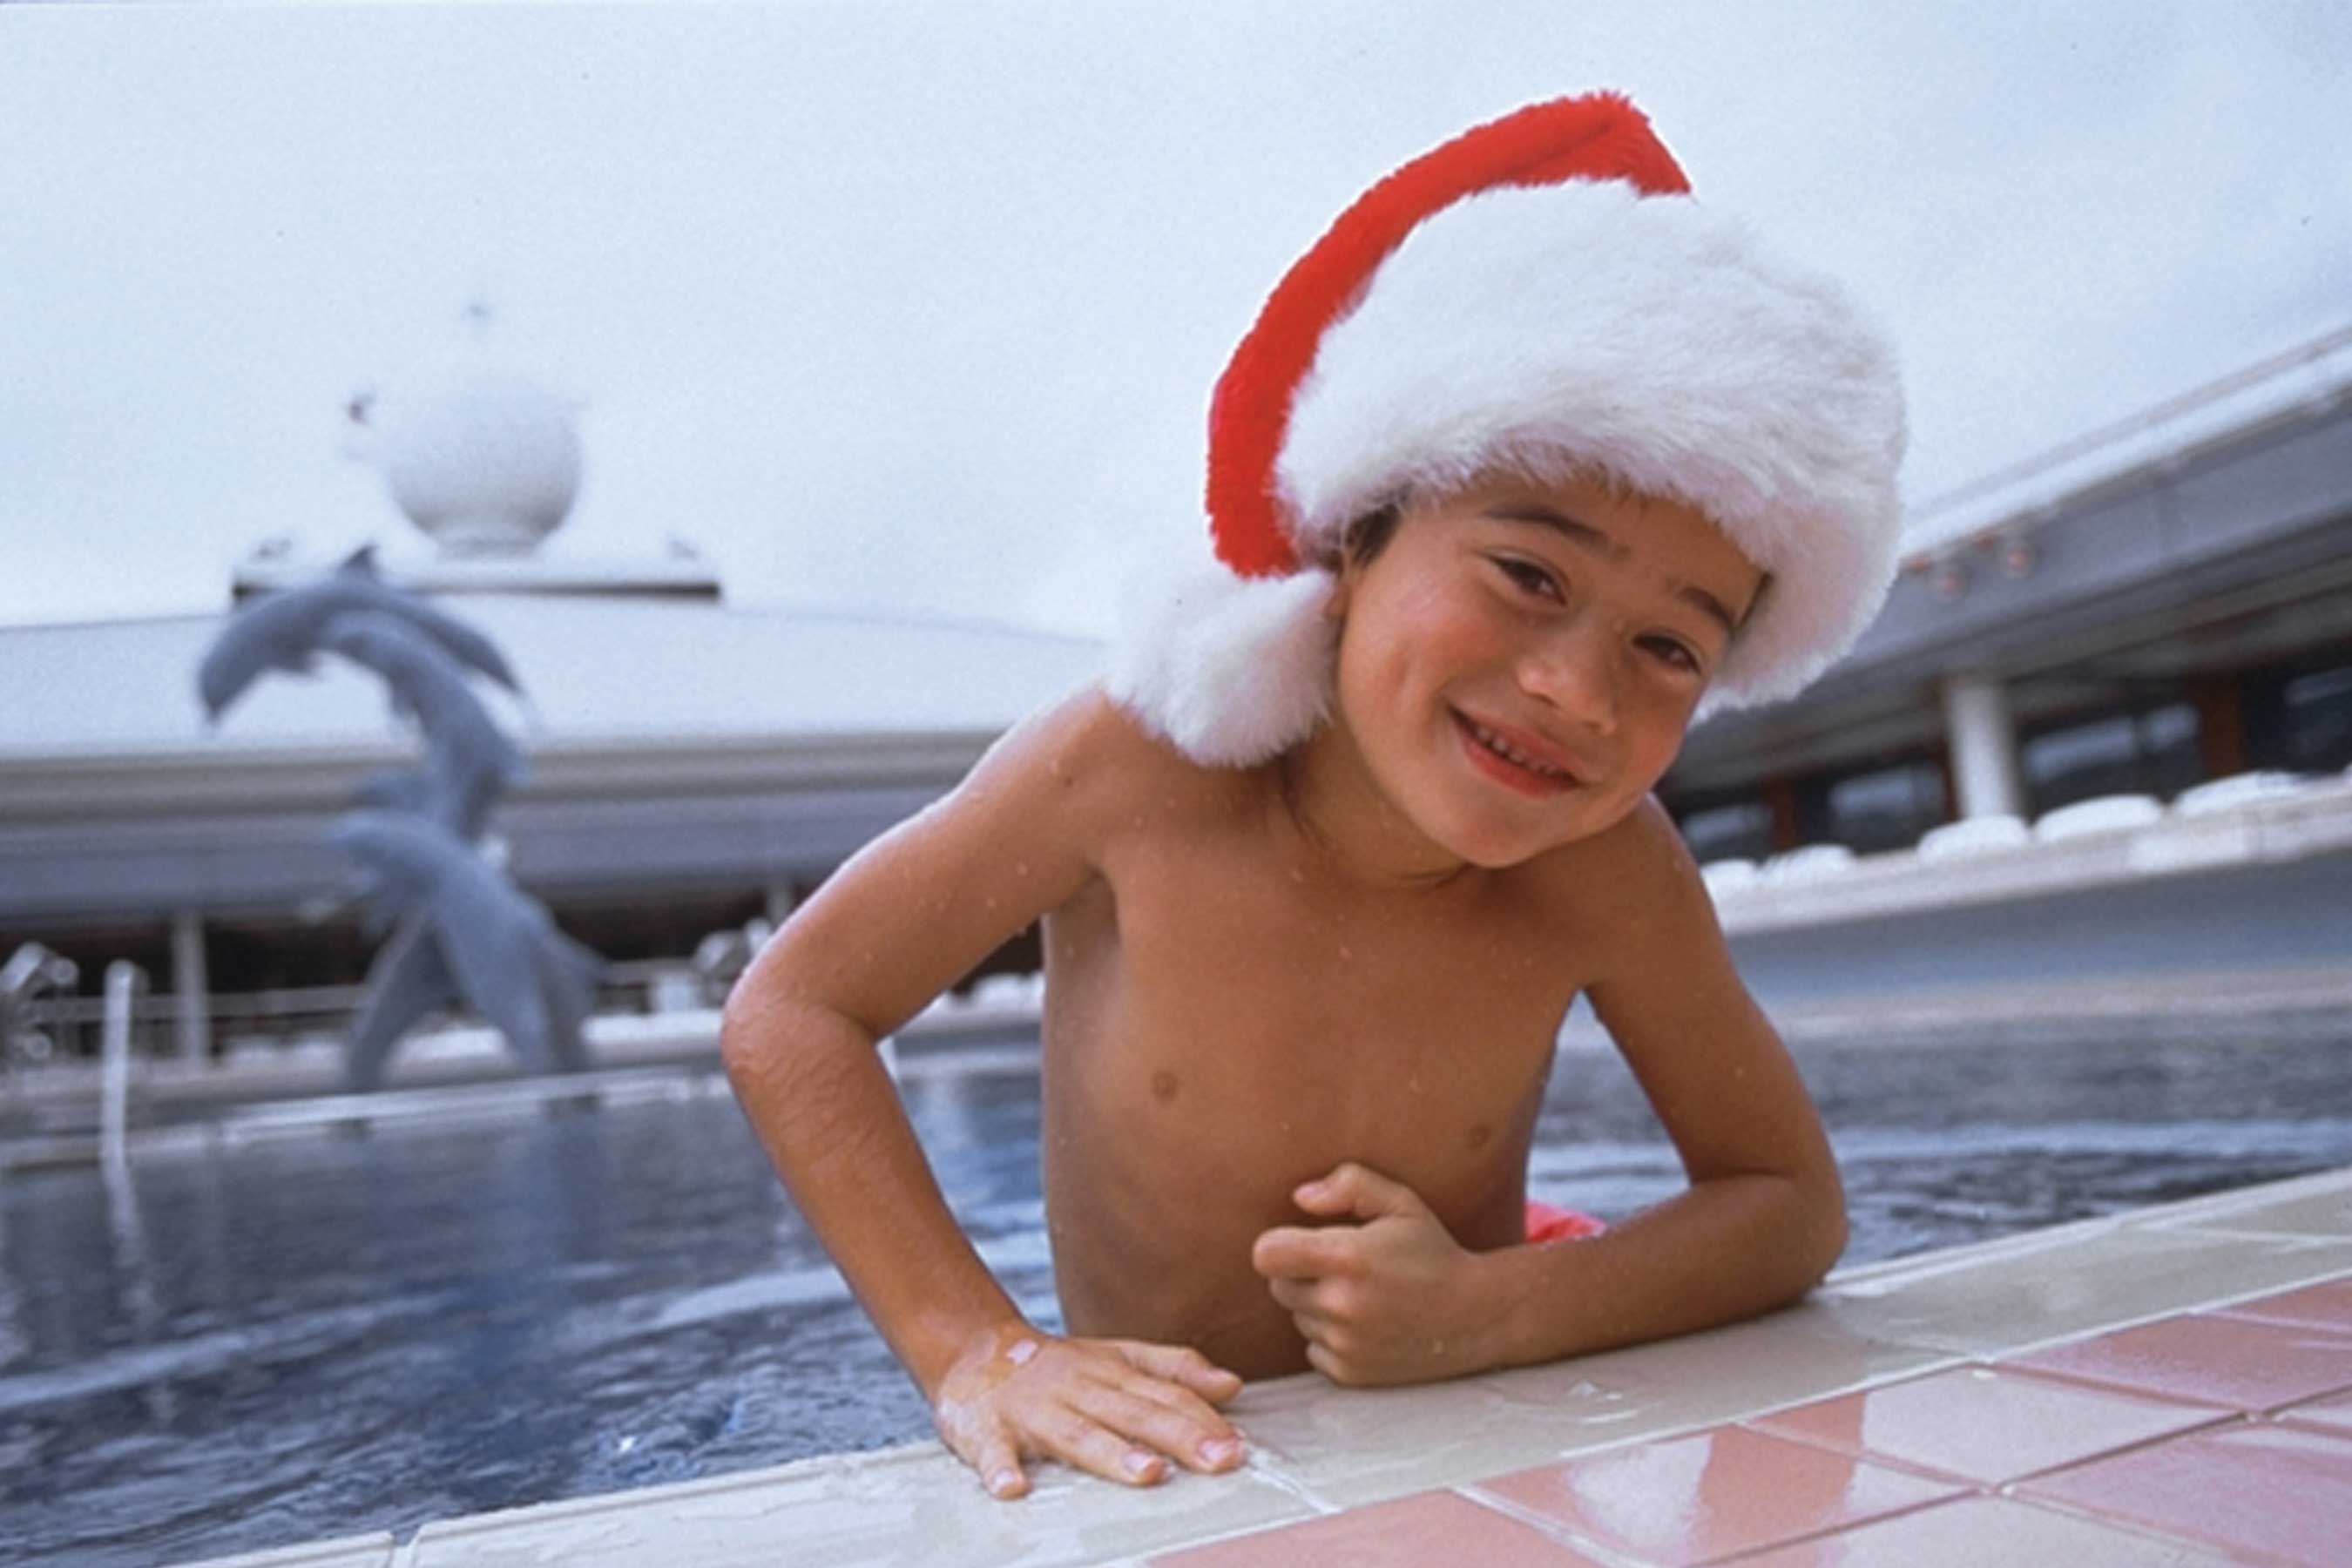 With free kids in same stateroom and vaccines for children 5 and older, holidays are a great time to try a cruise.